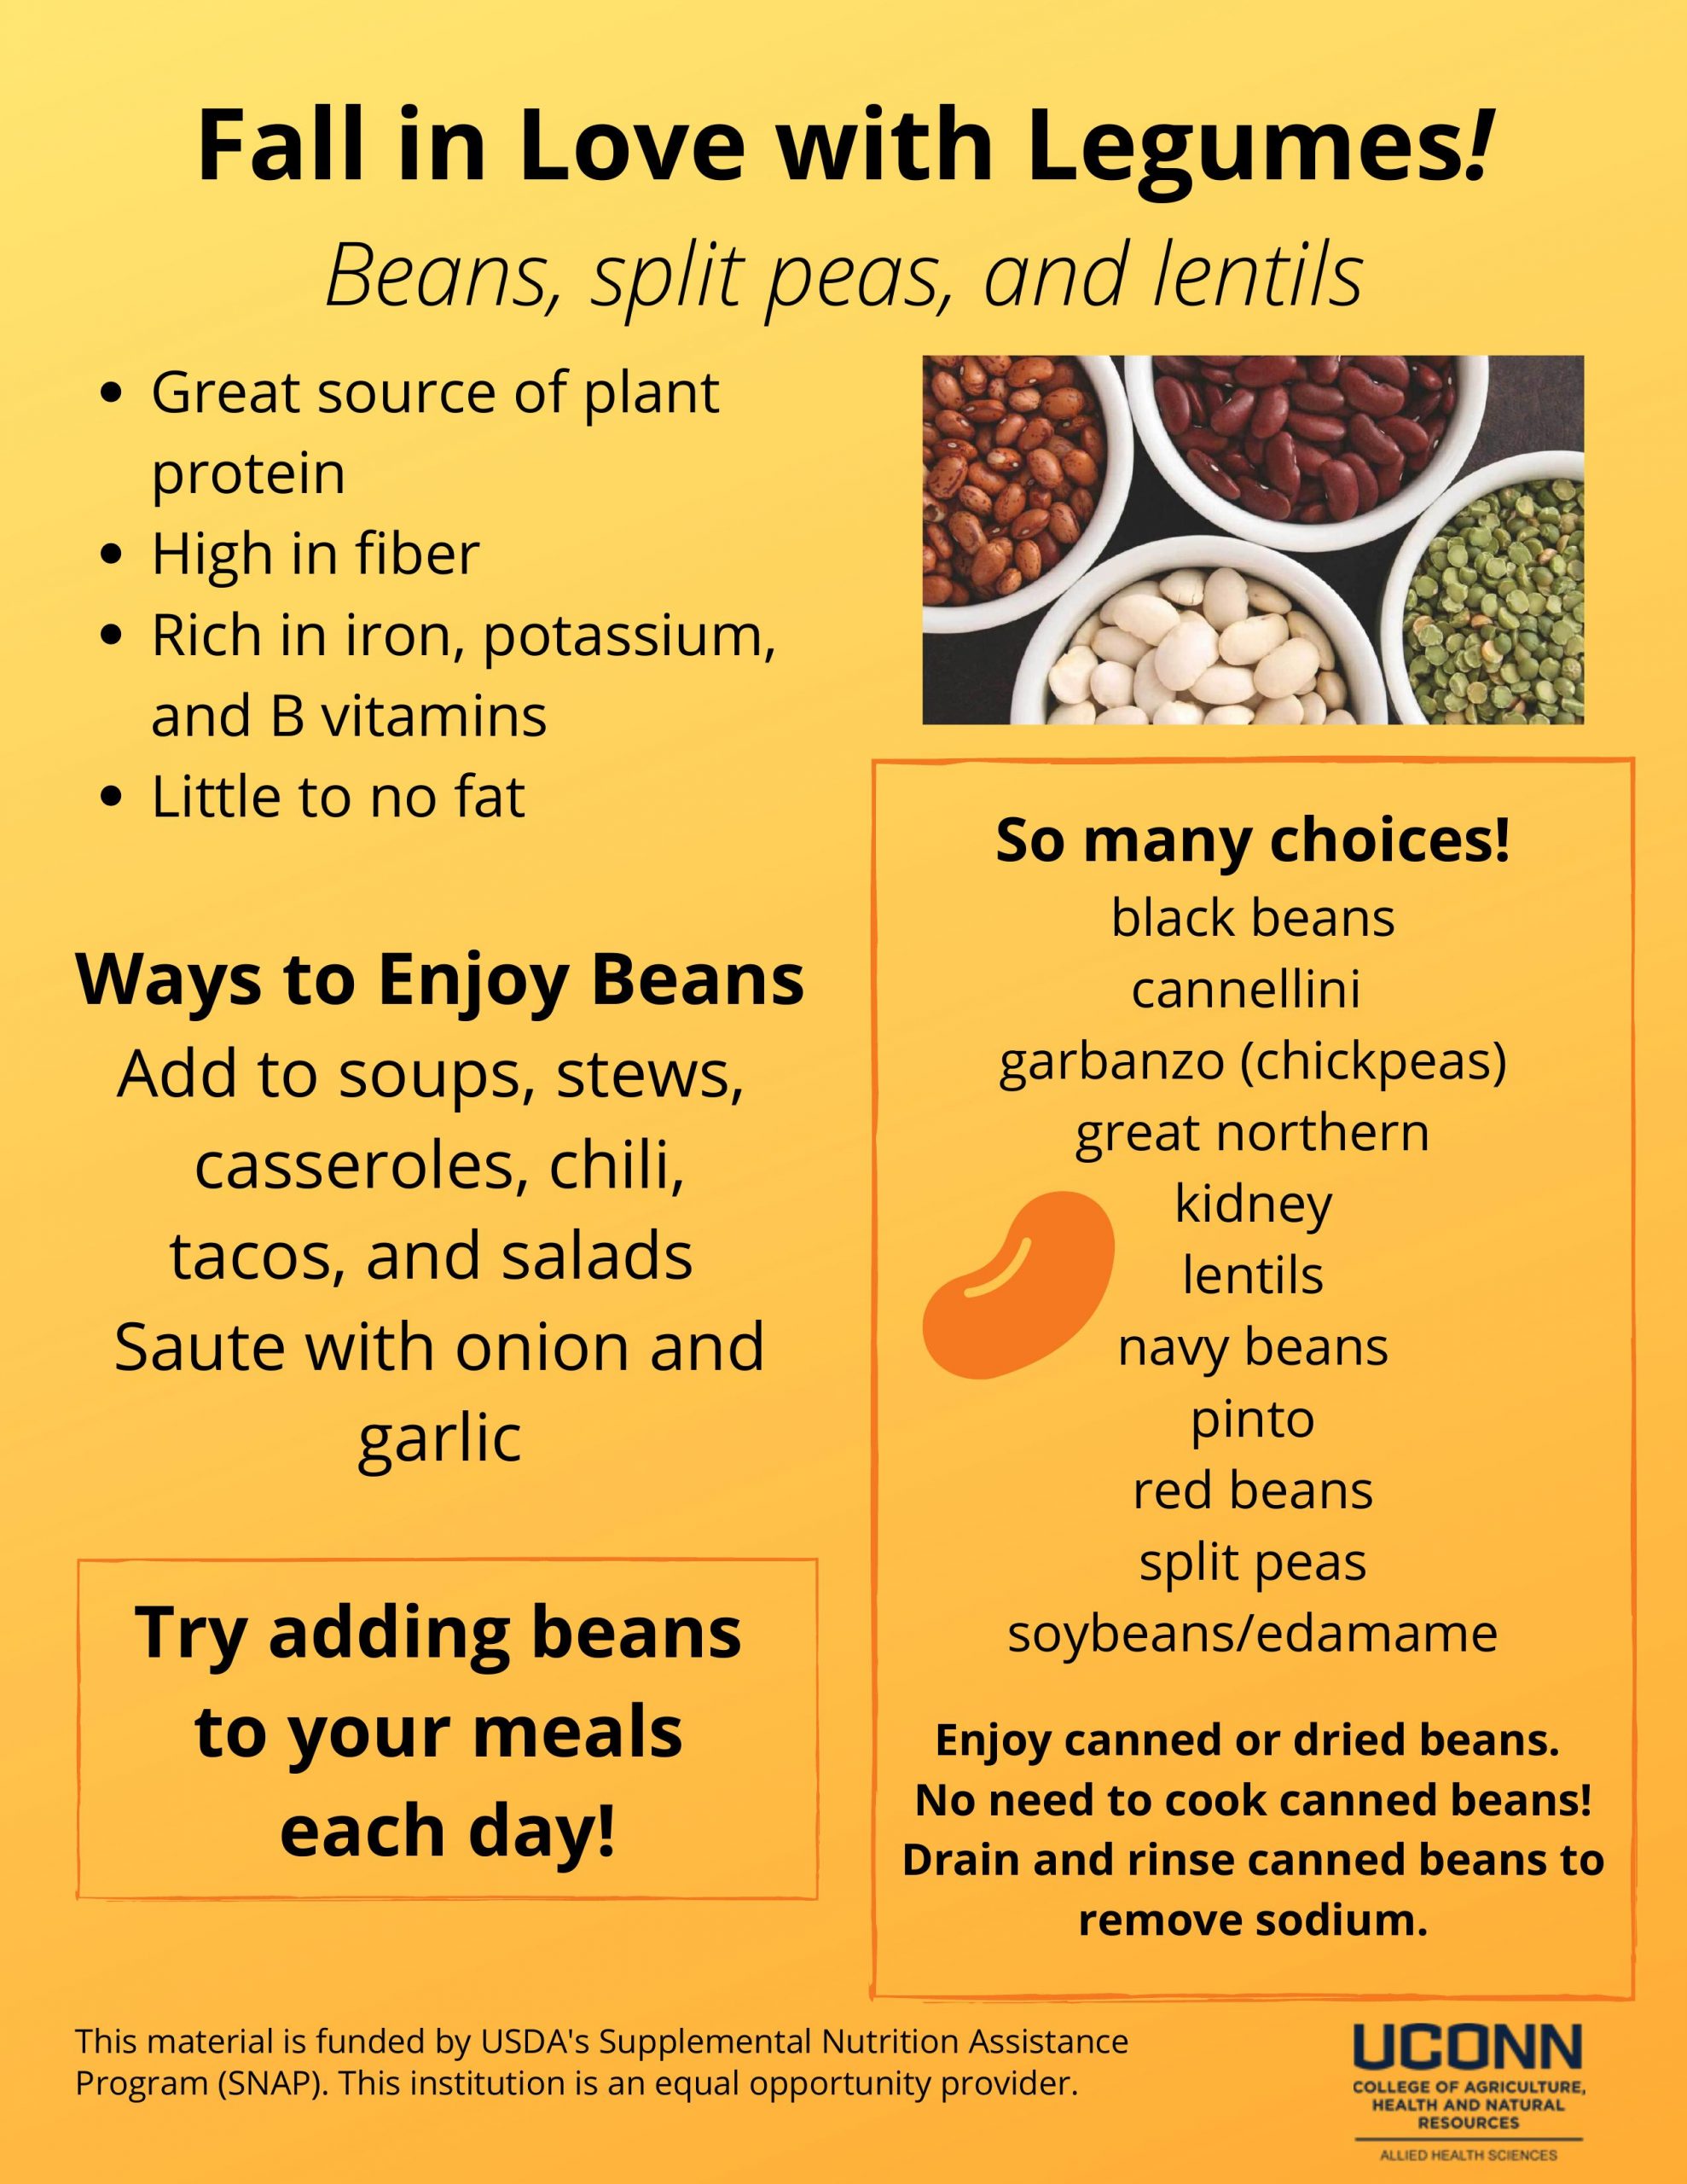 Fall in love with legumes handout